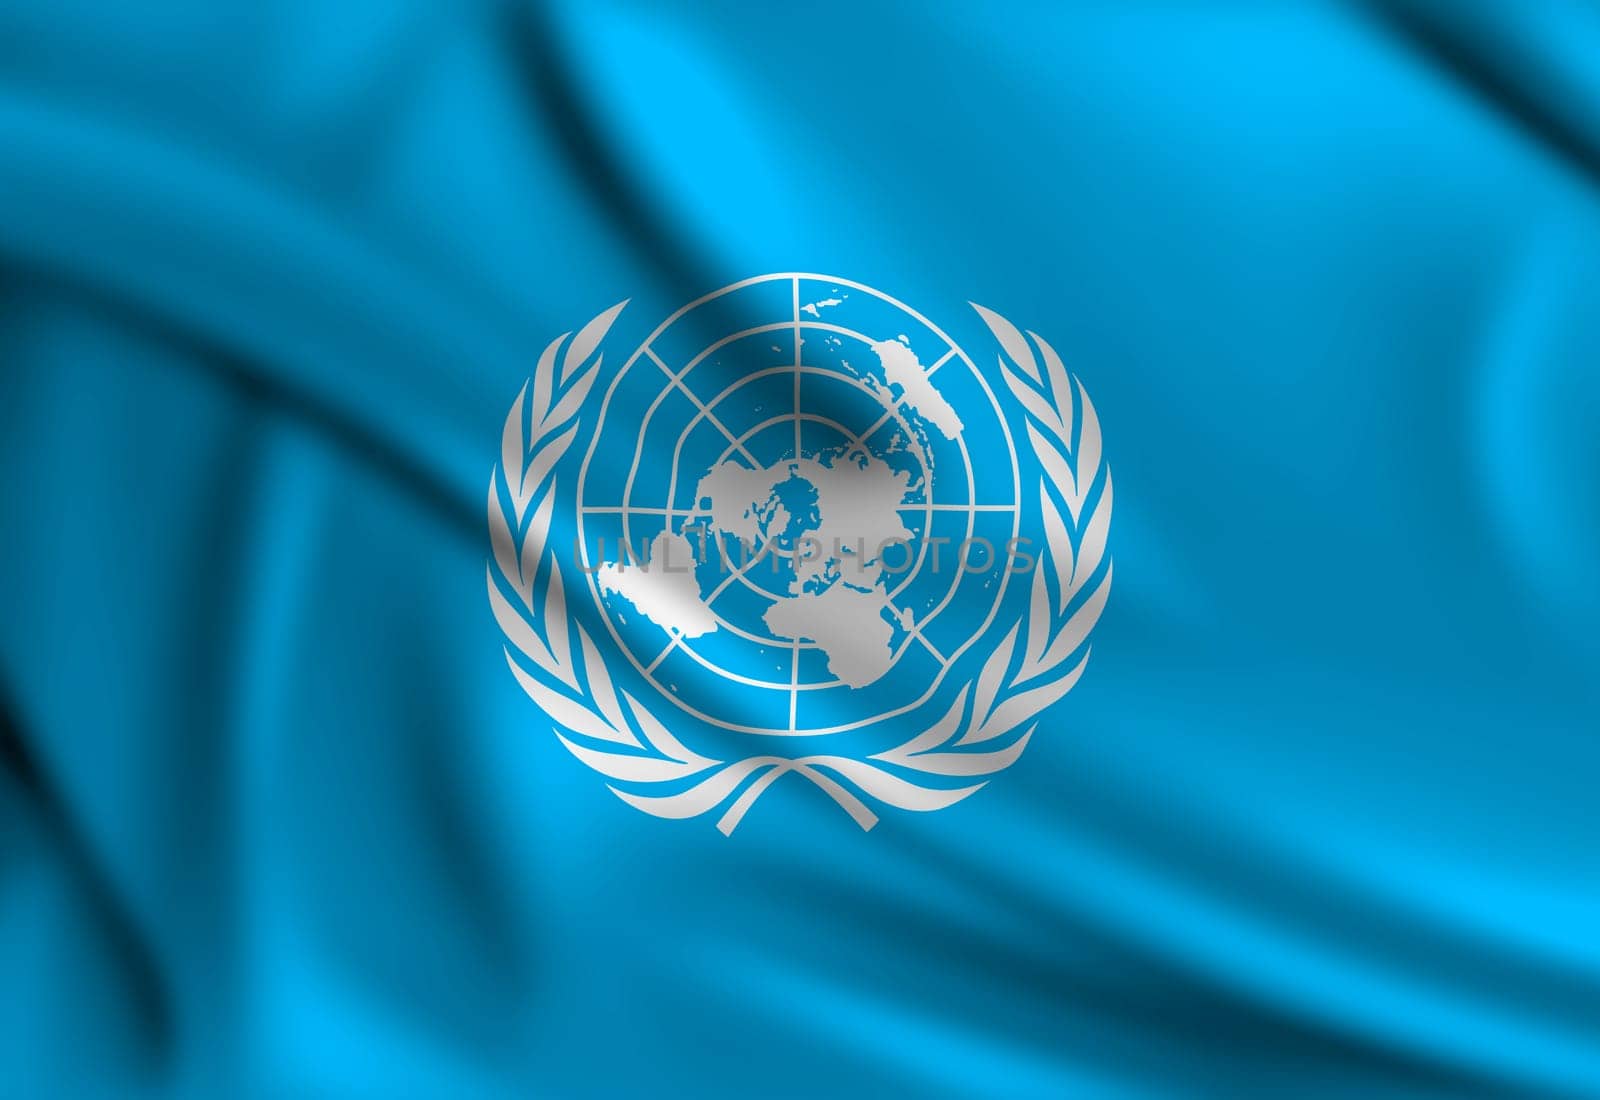 United Nations flag covering the frame is waving in the wind